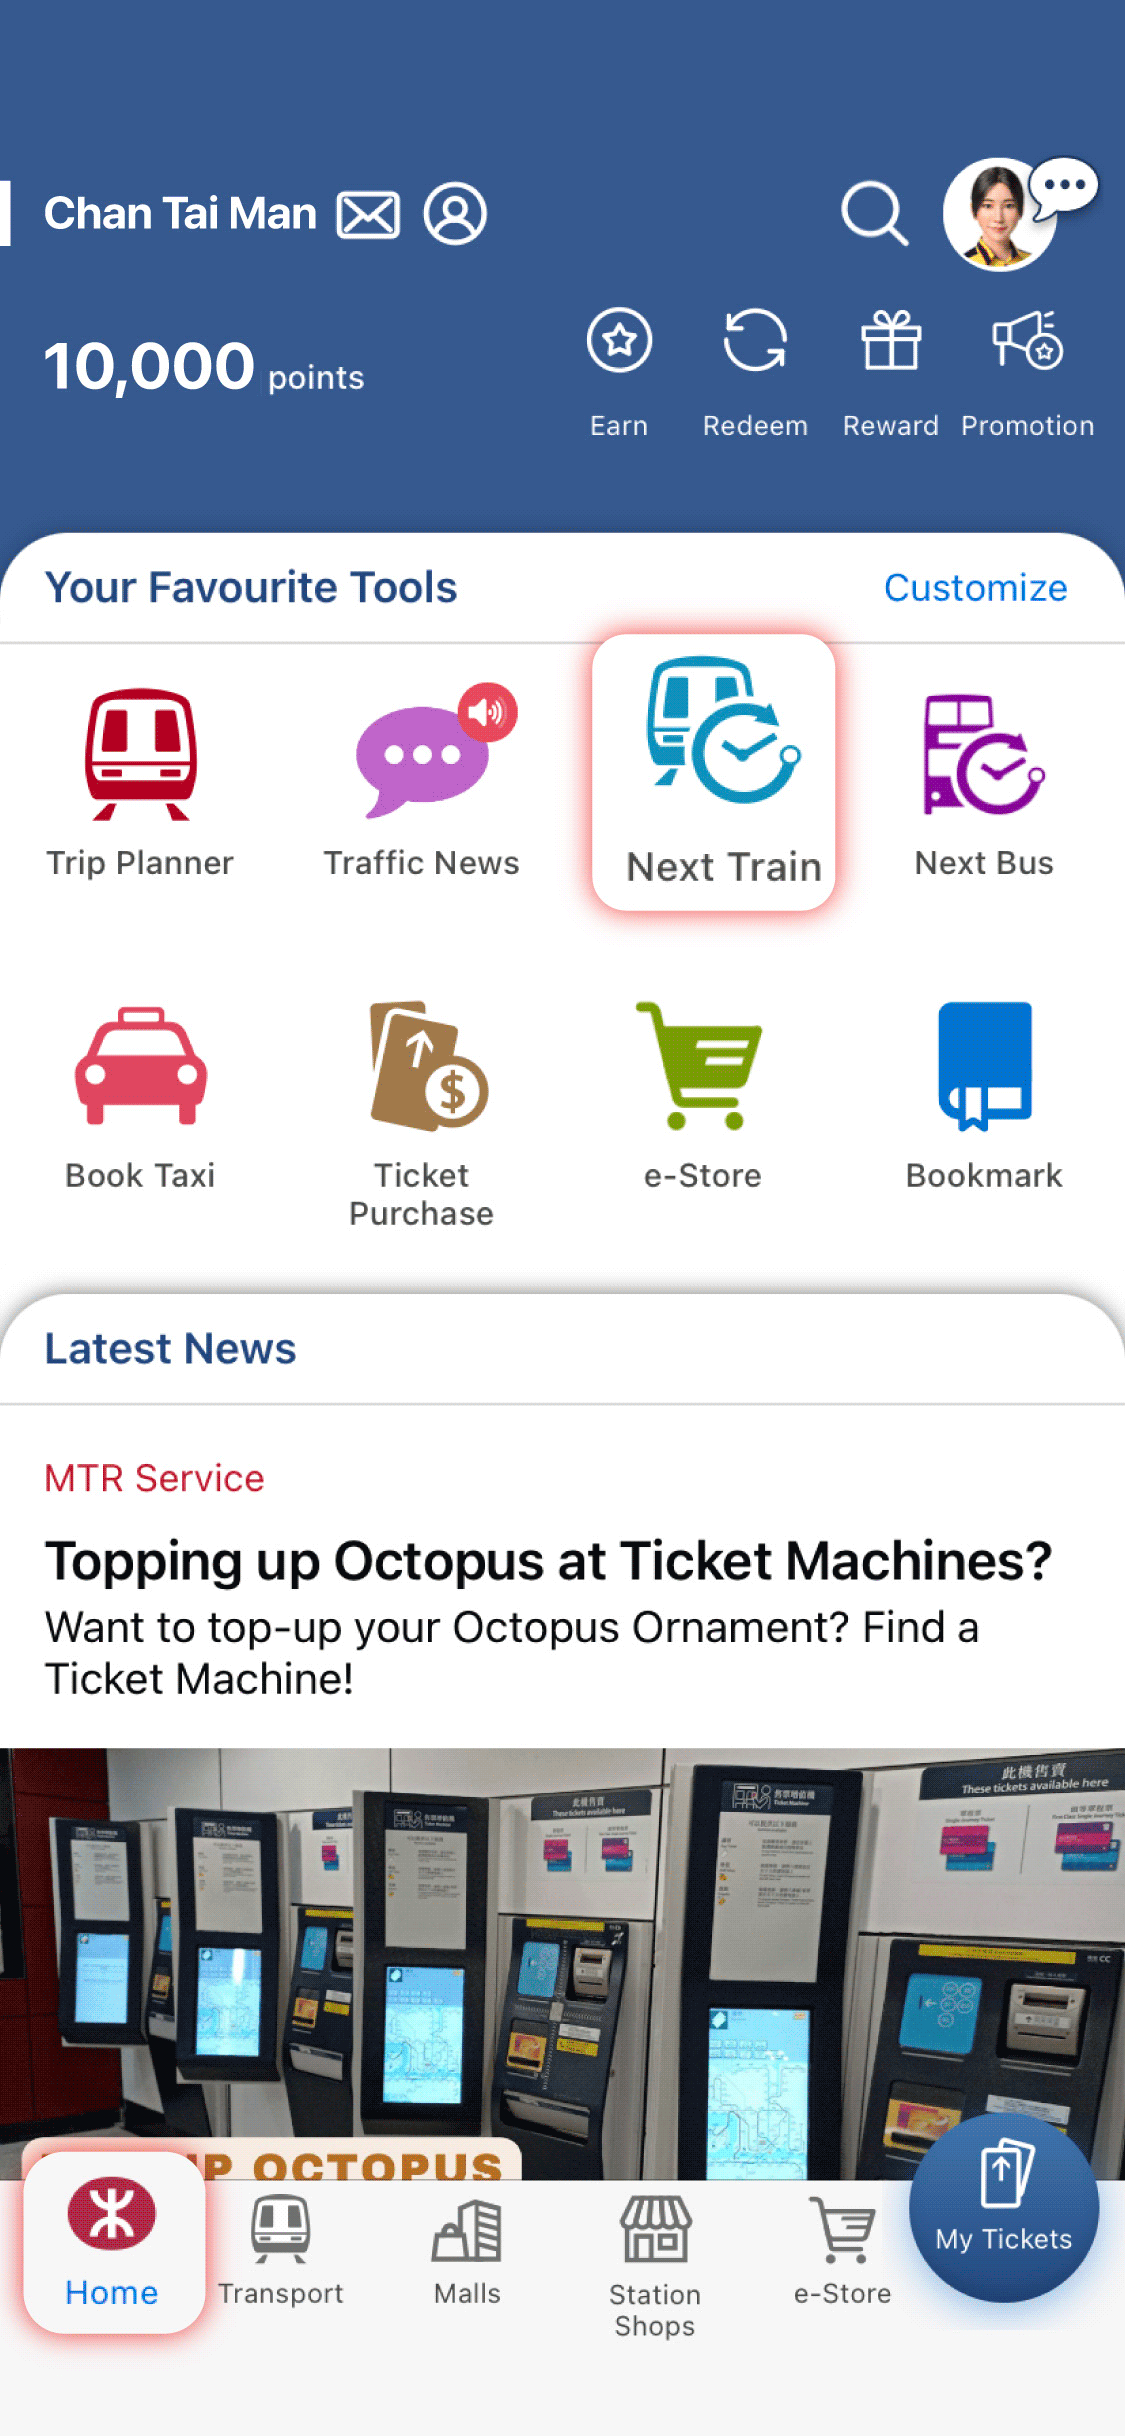 Tap the 'Next Train' icon on the MTR Mobile 'Homepage' or 'Transport' to access the function;